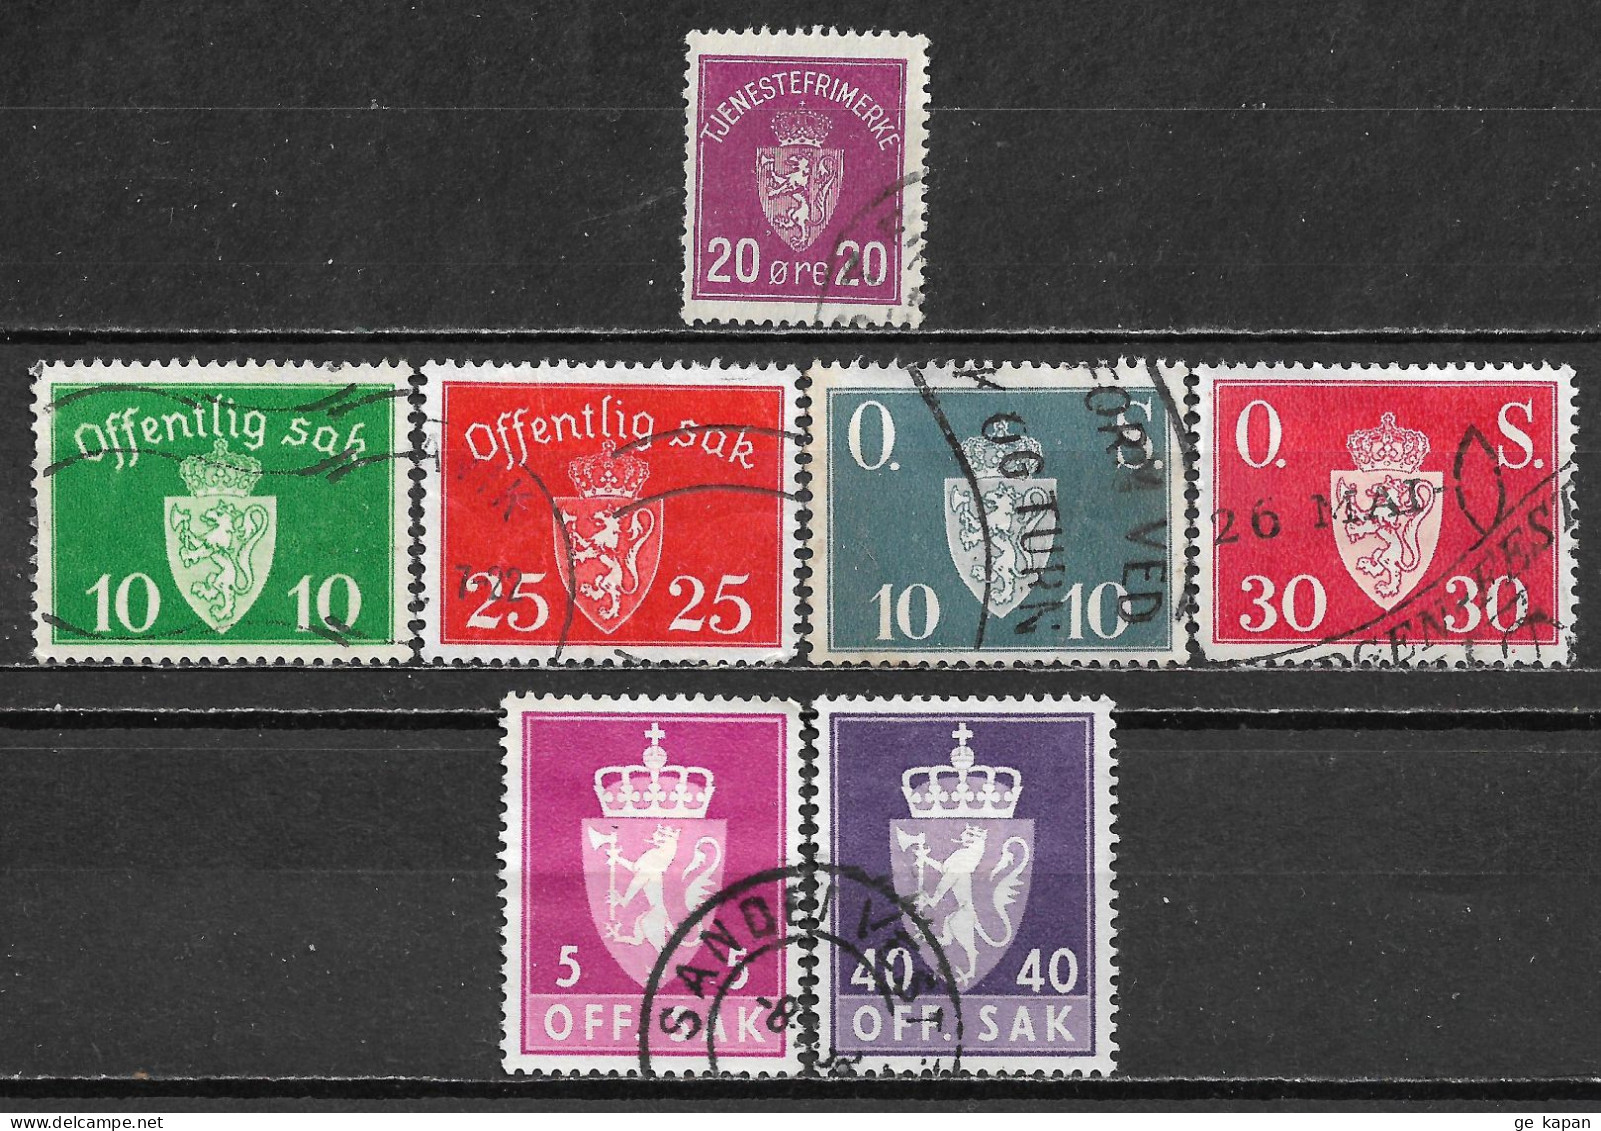 1926-1955 NORWAY SET OF 7 OFFICIAL USED STAMPS (Michel # 4,35,55,62,64,68x,75x) - Servizio